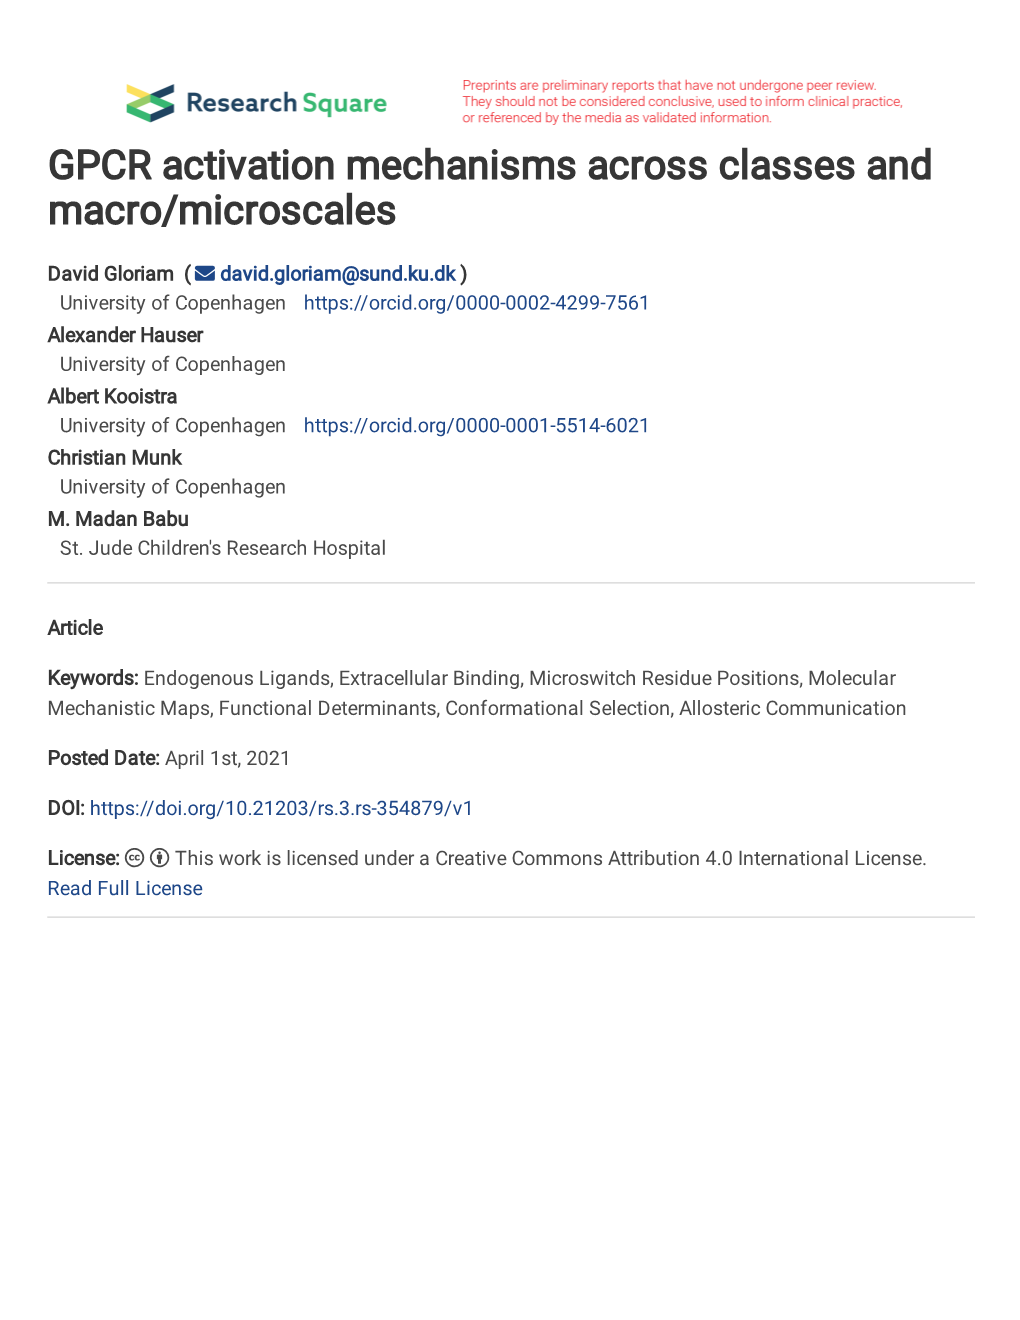 GPCR Activation Mechanisms Across Classes and Macro/Microscales